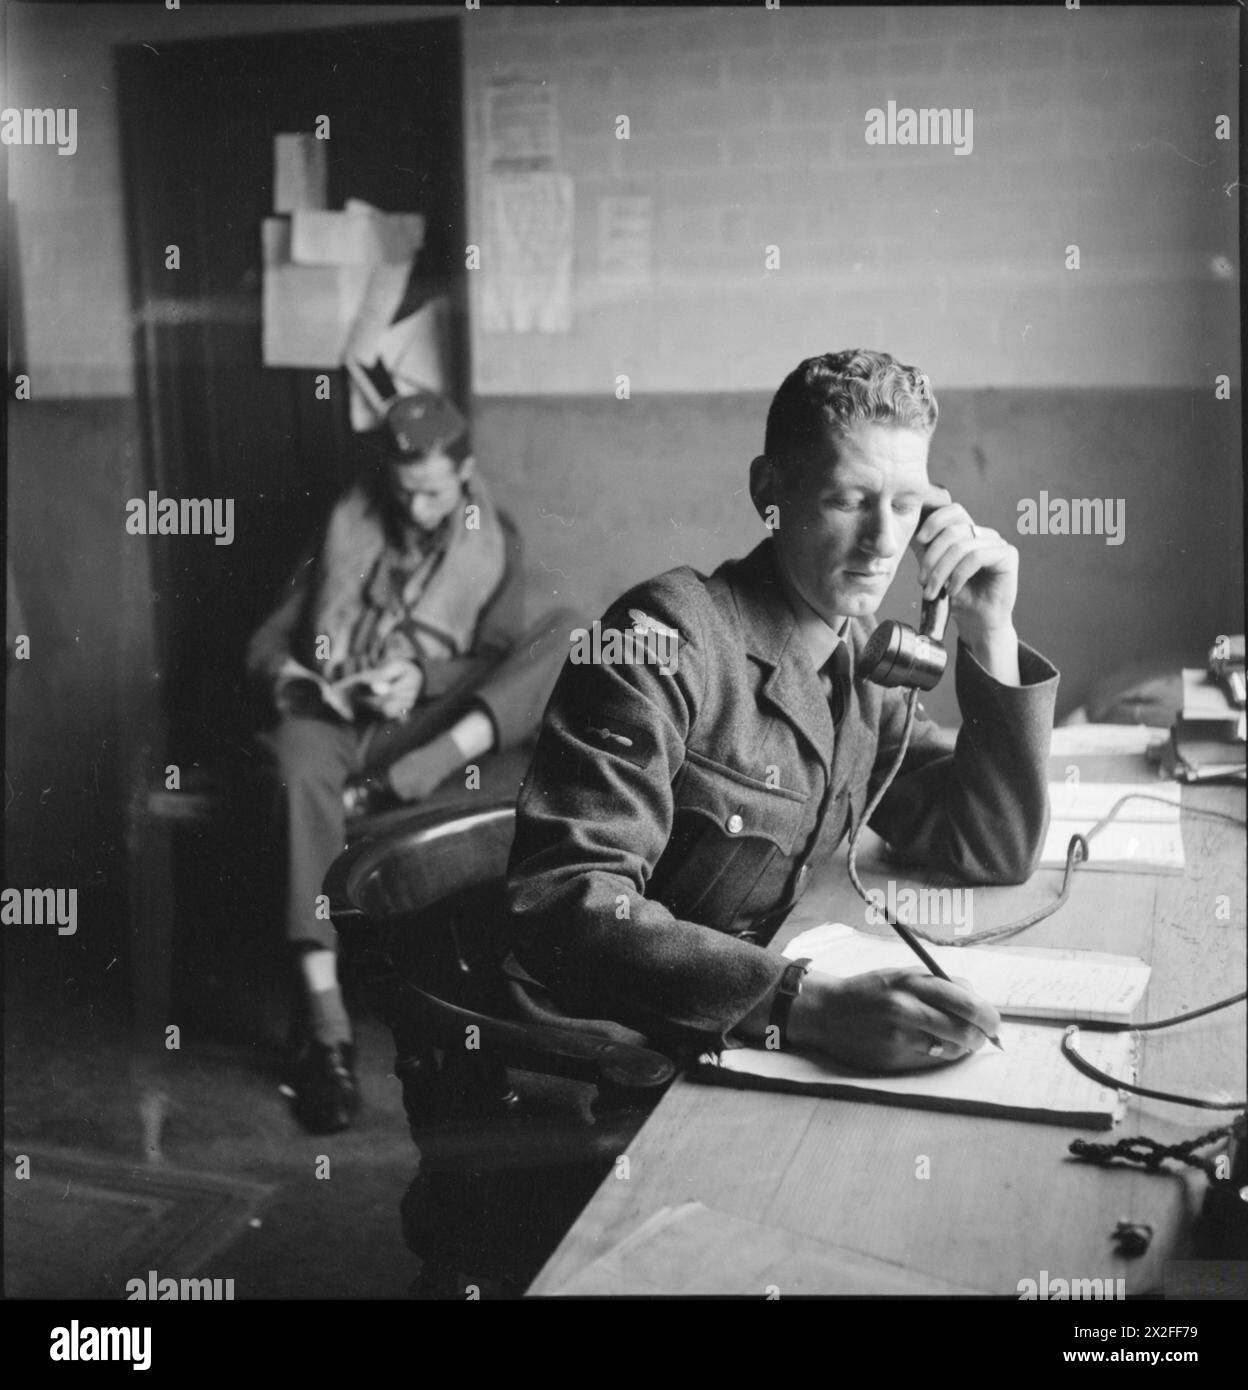 AMERICANS IN BRITAIN: THE WORK OF NO 121 (EAGLE) SQUADRON RAF, ROCHFORD, ESSEX, AUGUST 1942 - In the Dispersal Hut at Rochford airfield, the telephonist logs a call from the Control Tower, confirming that 12 Spitfires are successfully airborne. In the background, a 'spare' pilot reads a book Royal Air Force Stock Photo